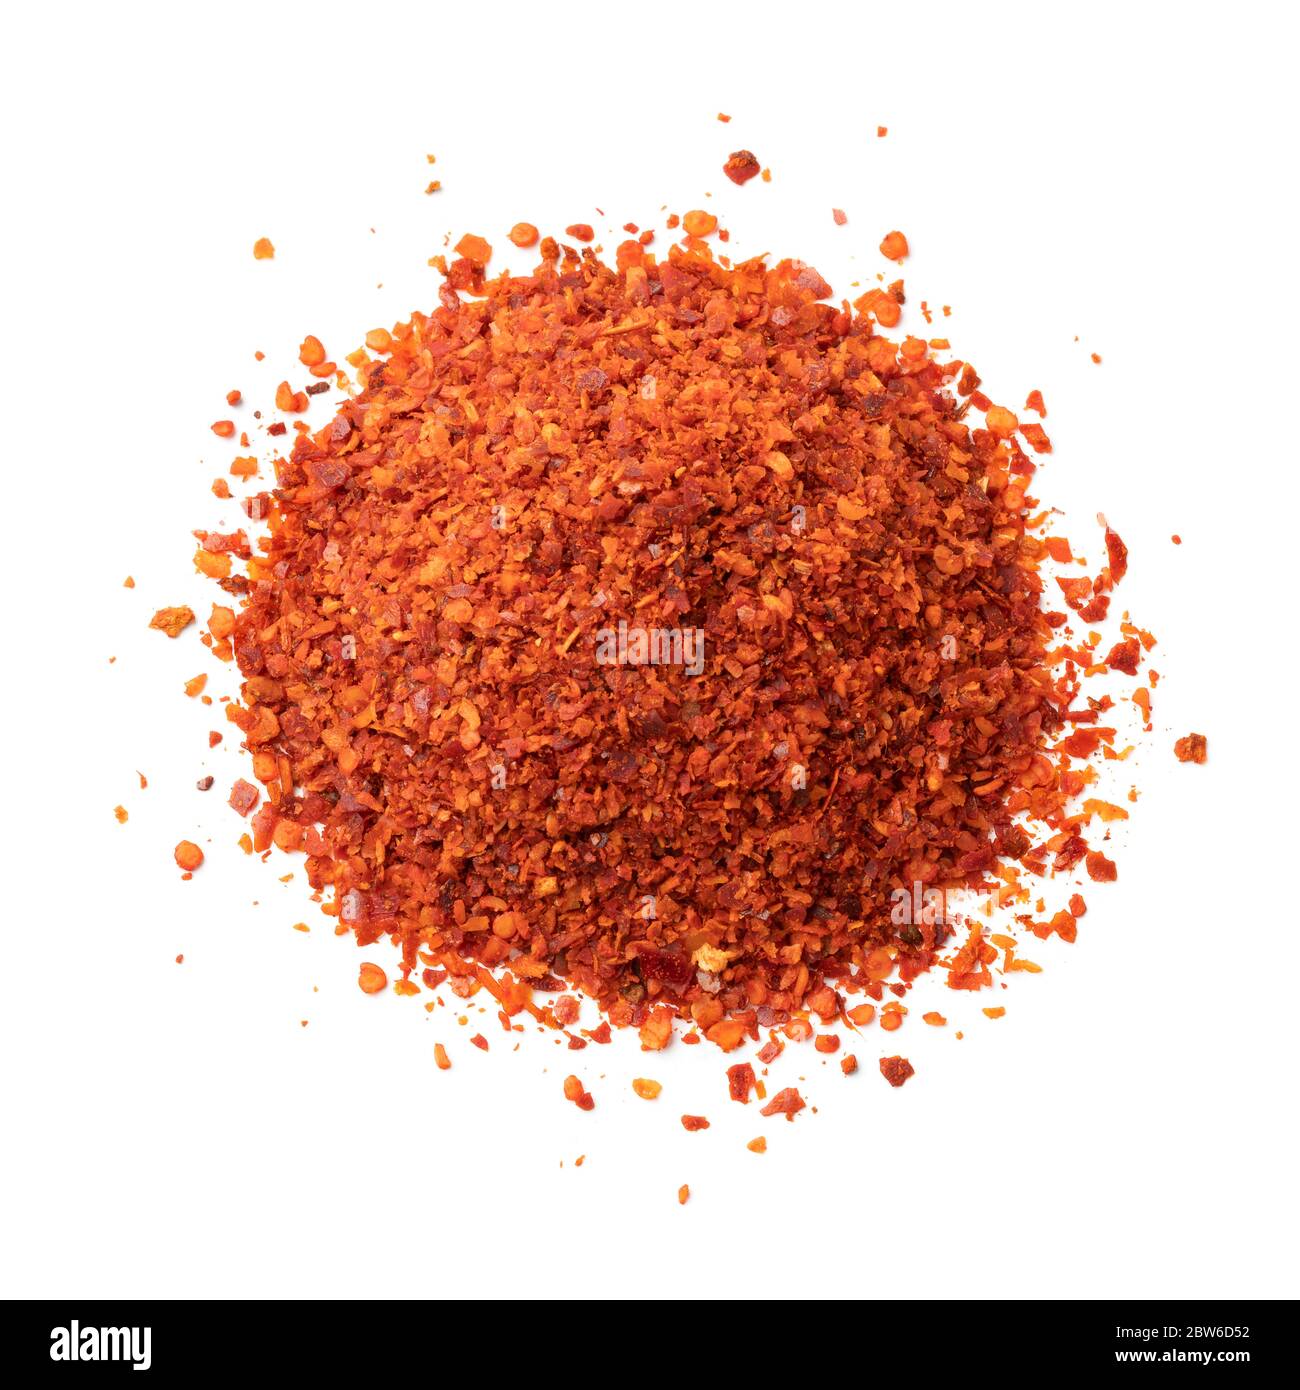 Heap of coarsely ground paprika isolated on white background Stock Photo